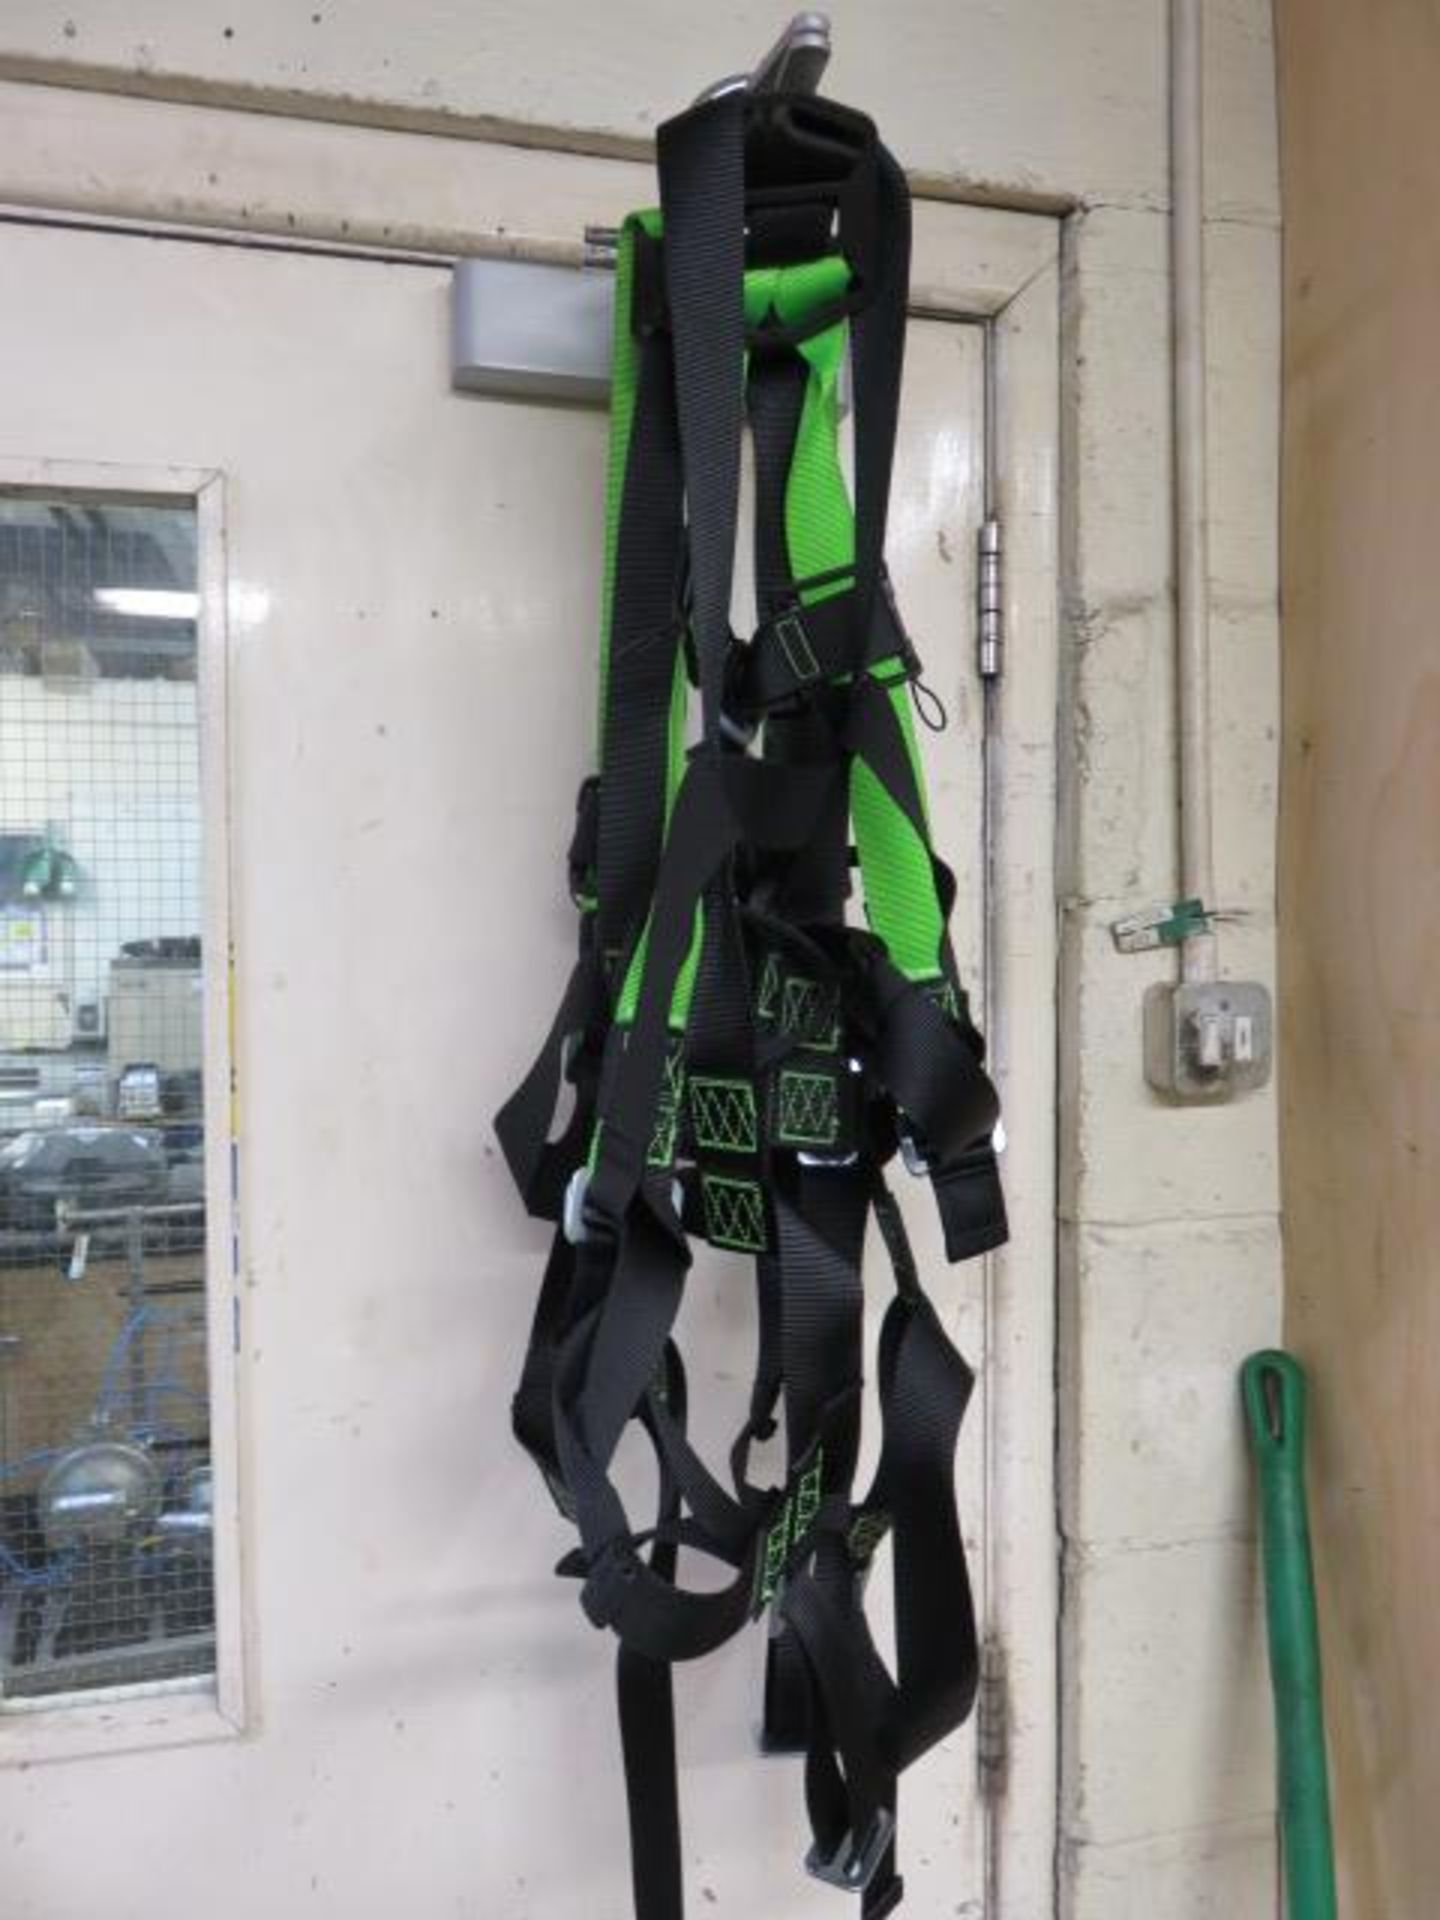 (2) Honeywell Miller H-Design Safety Harnesses with (2) Ridgegear Kernmantle Rope Grabs, (2) Unilink